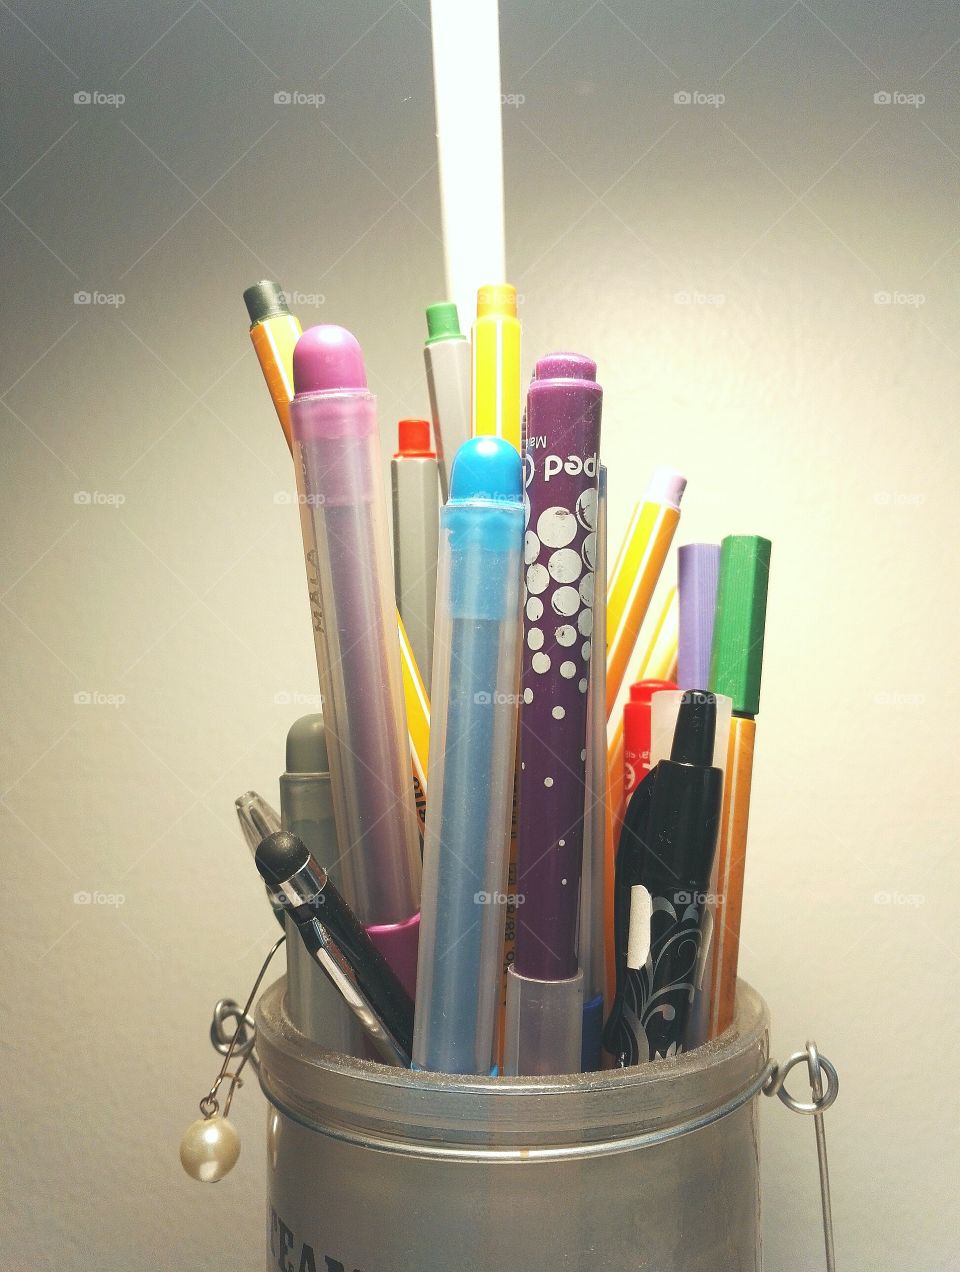 Colorful Pencils Under The Light.